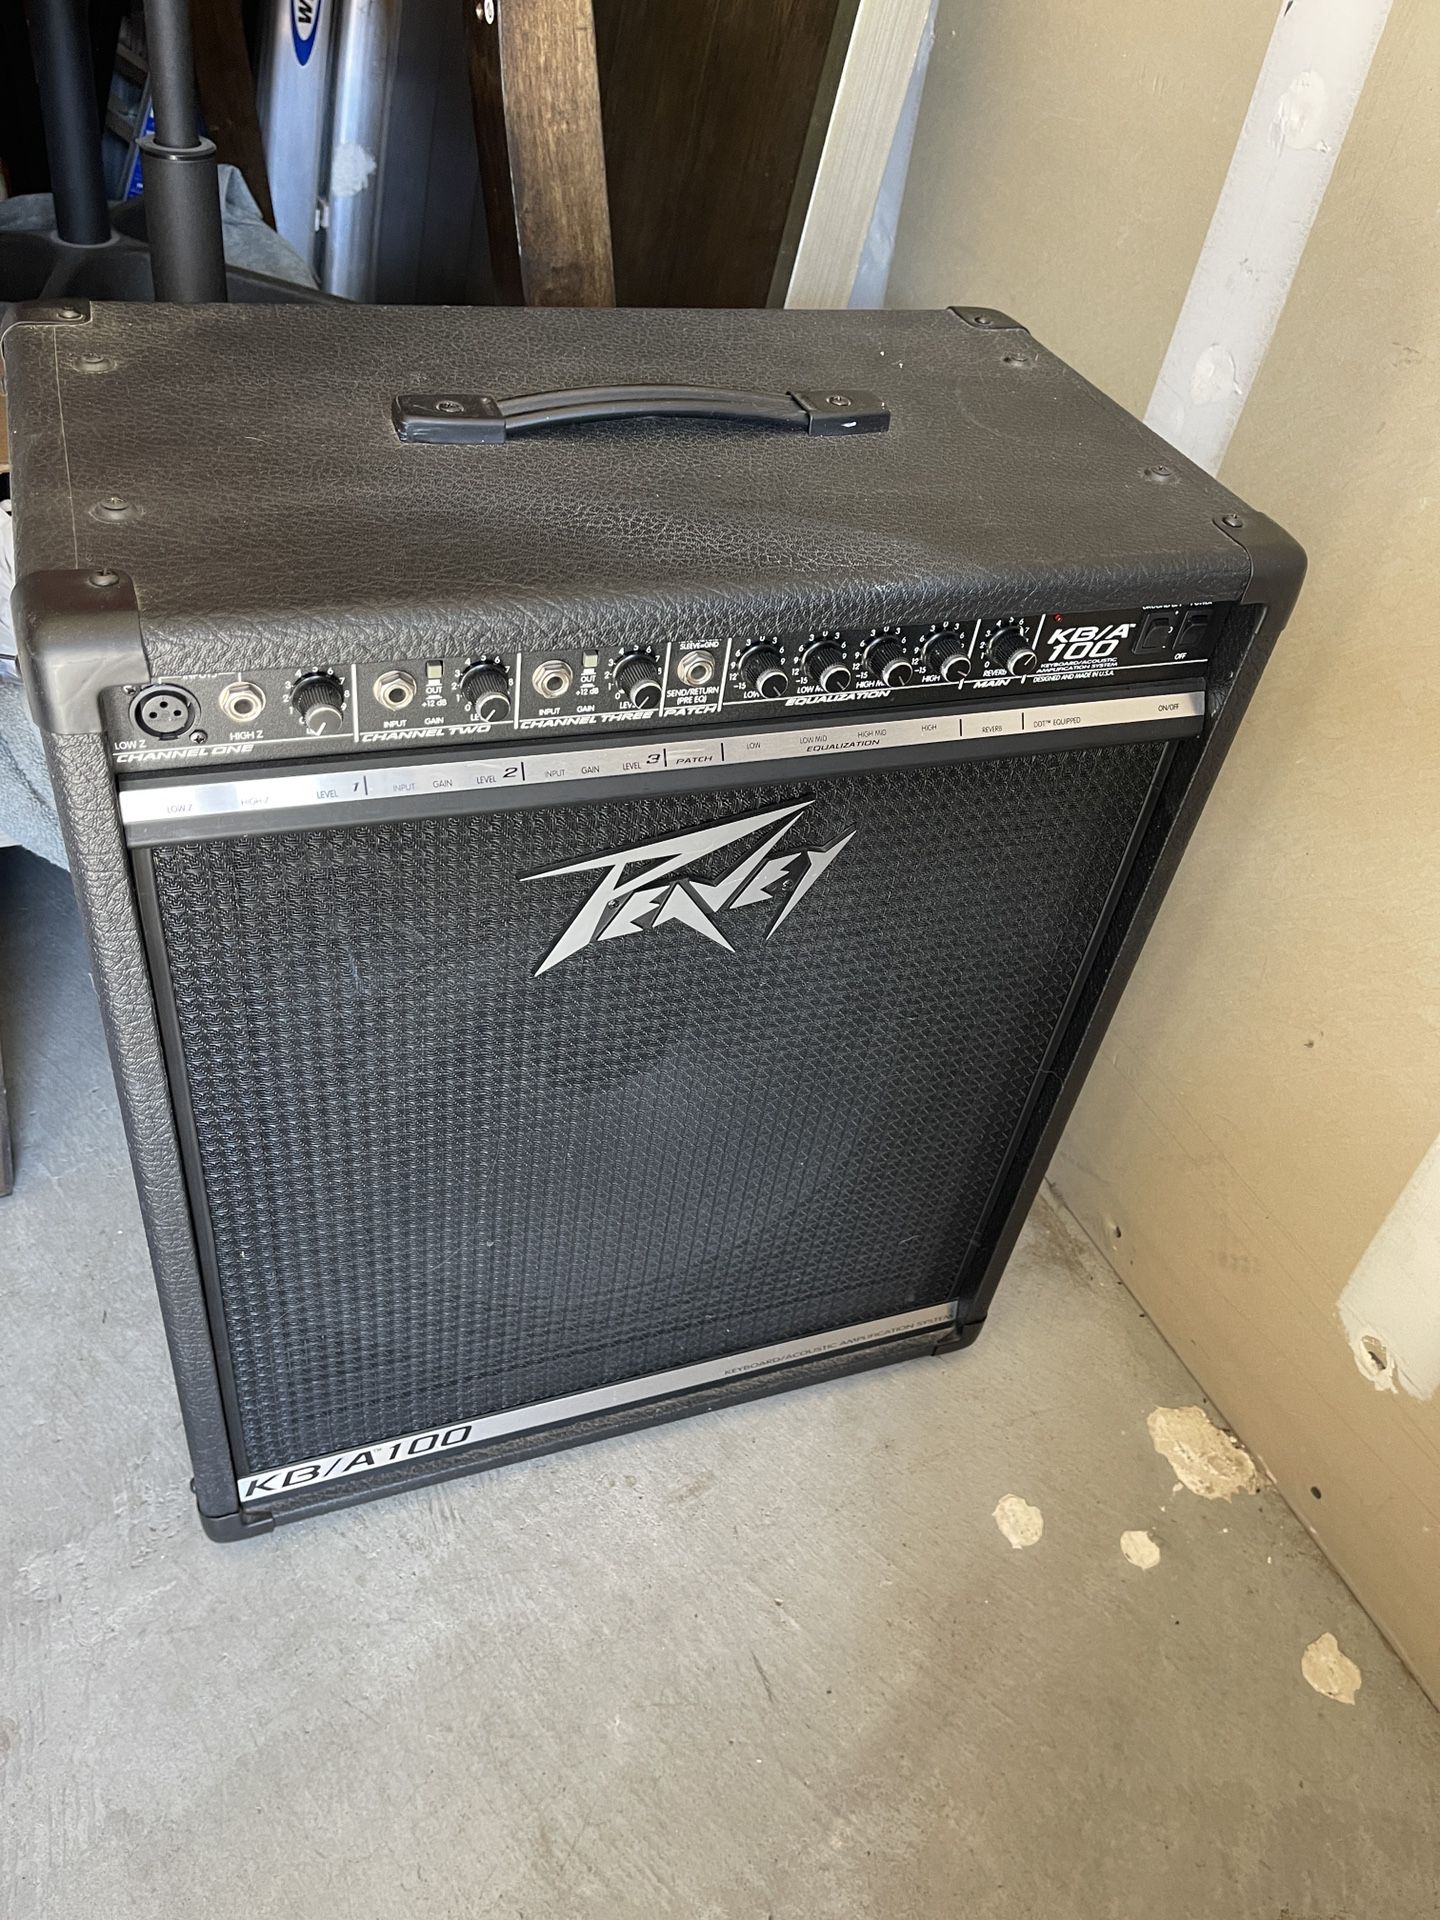 Peavey Amplifier, Use For Keyboard, Bass Guitar, Drum Kit